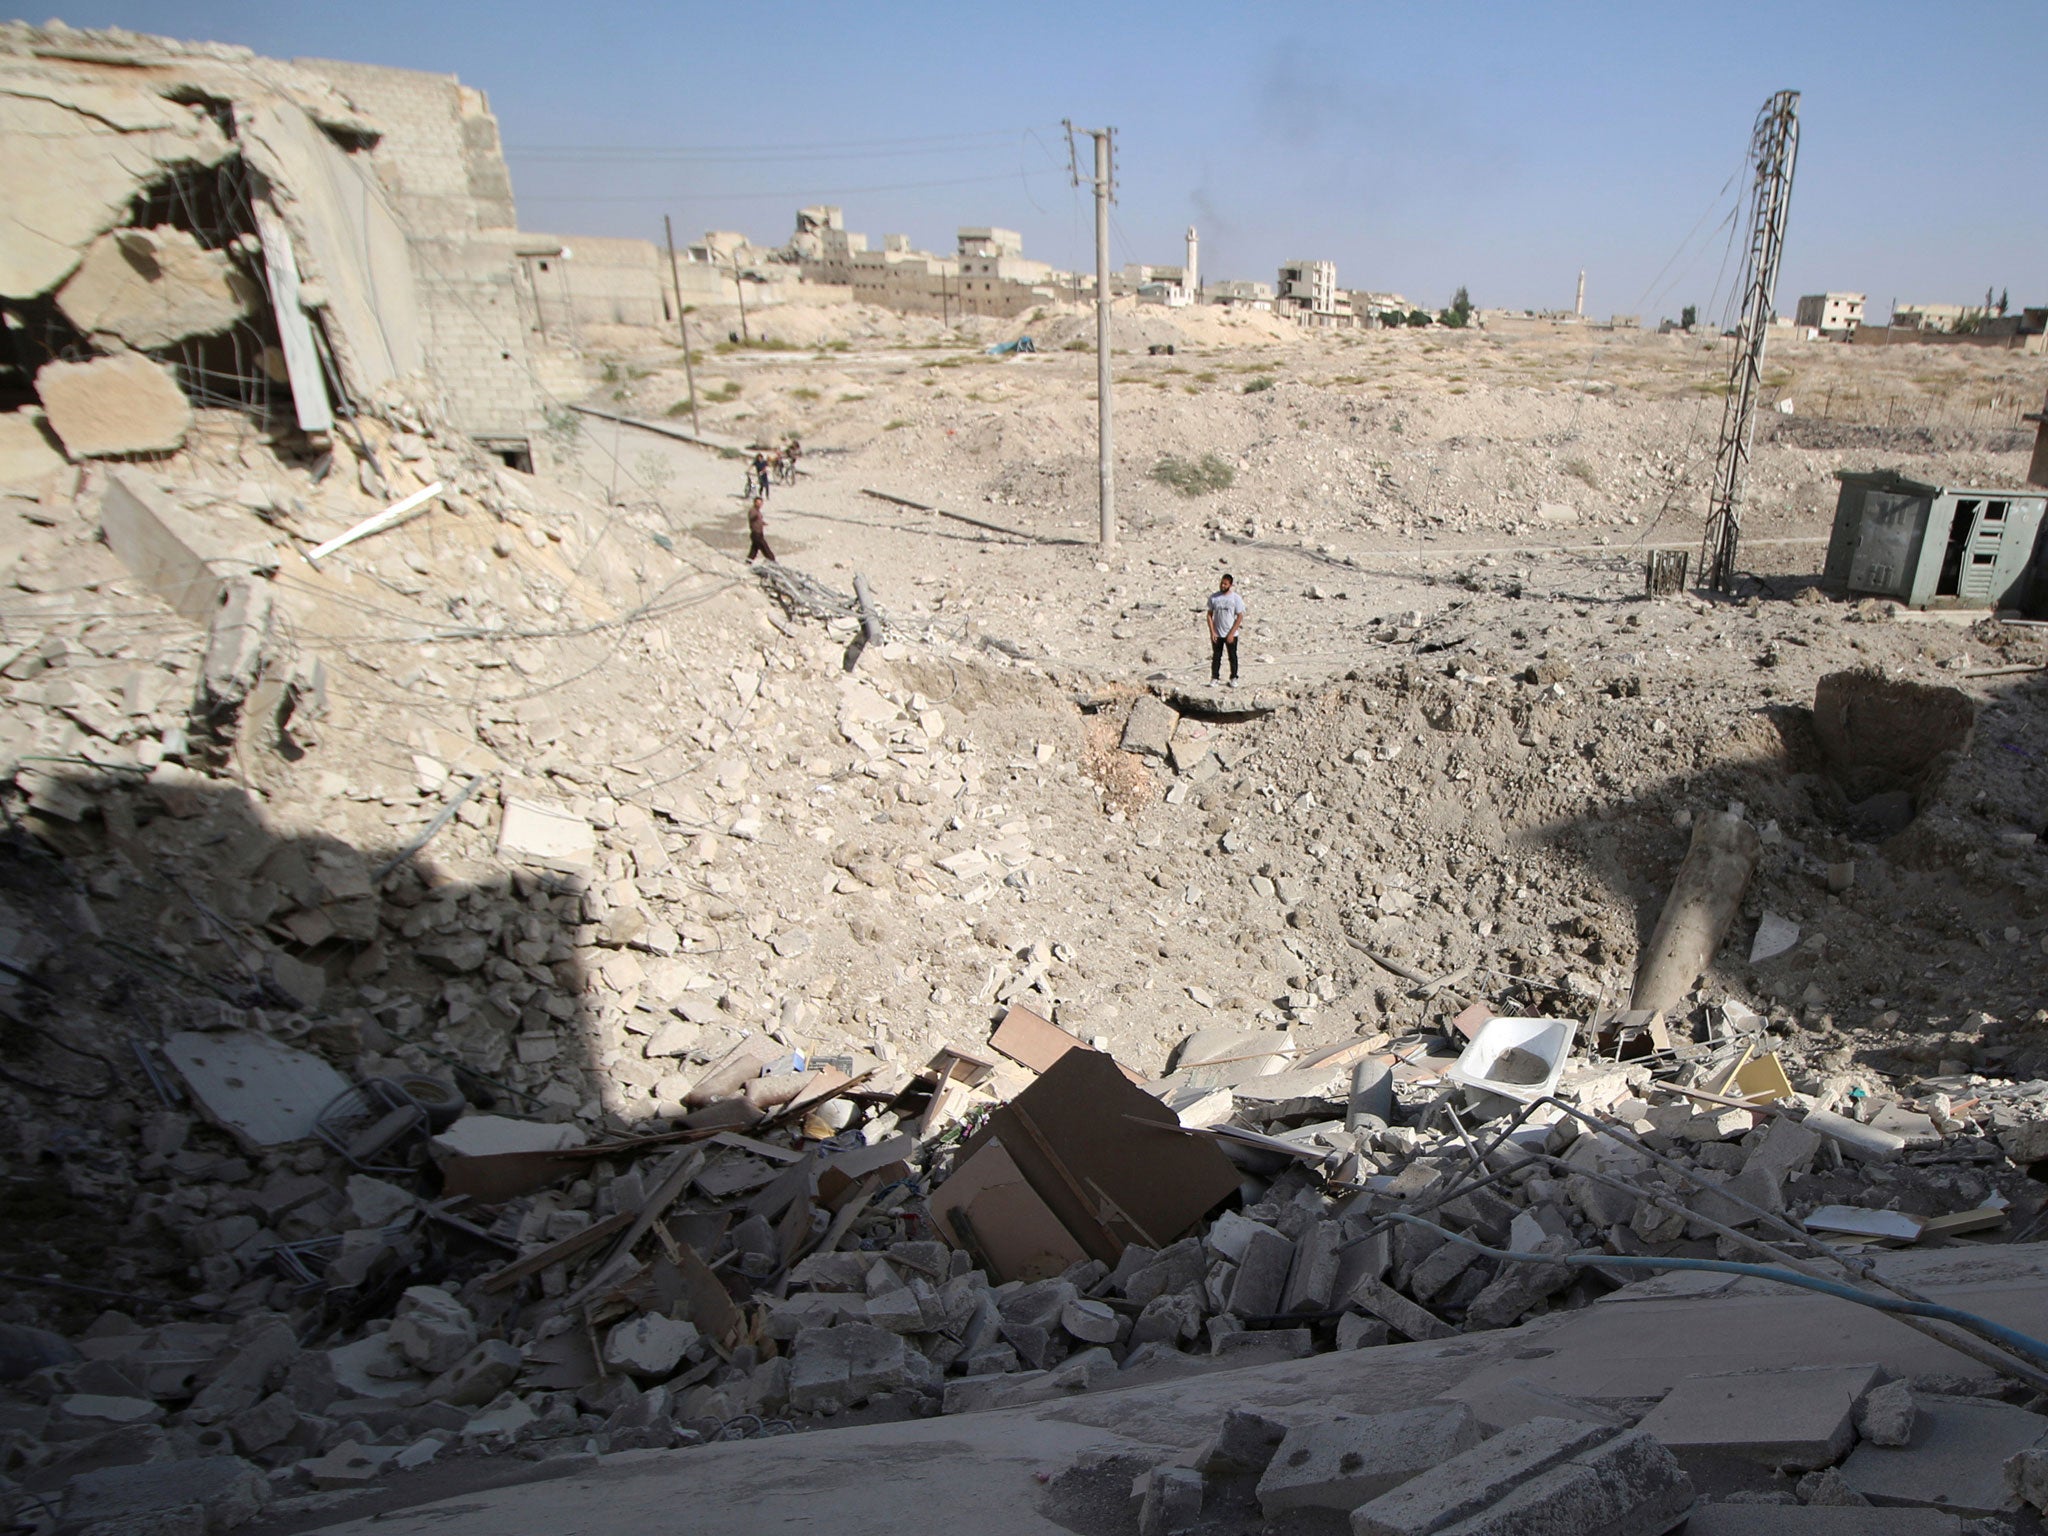 The crater left after an air strike in the rebel held Karam Houmid neighbourhood in Aleppo